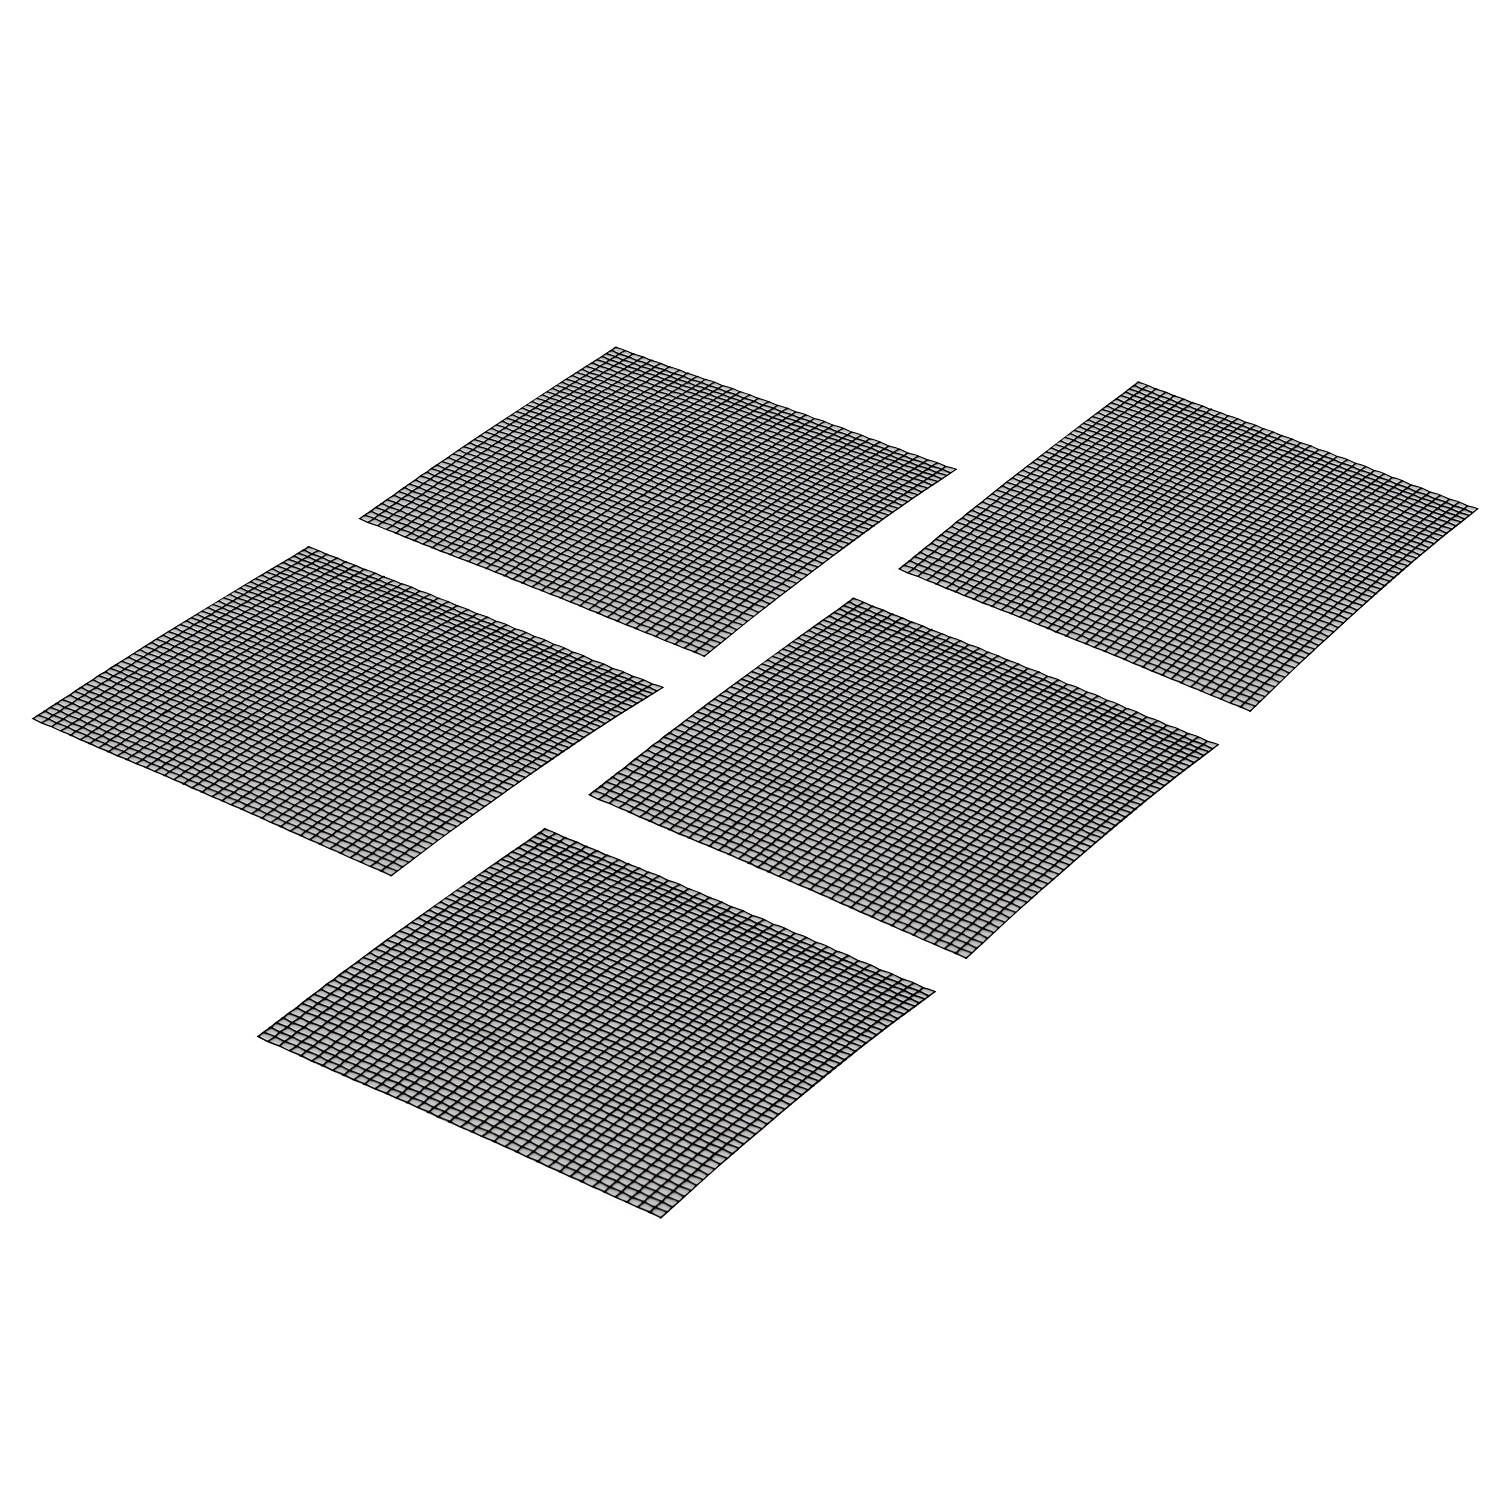 Seal Gray 3.5" X 3.5" Self Stick 8 ct FOUR 2 Pack Window Screen Repair Patch 